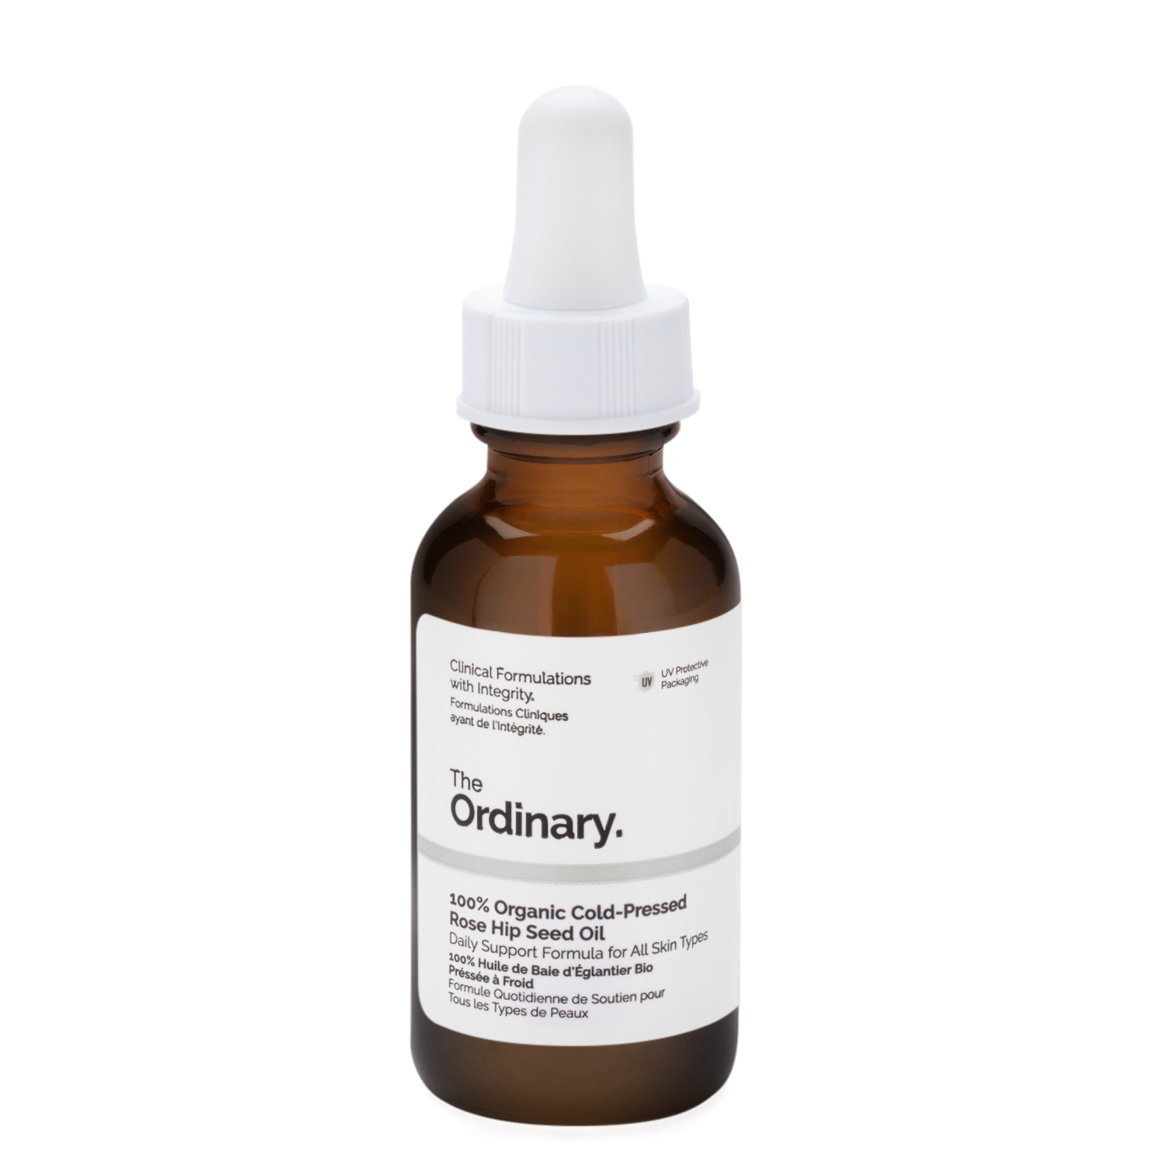 The Ordinary. 100% Organic Cold-Pressed Rose Hip Seed Oil alternative view 1 - product swatch.